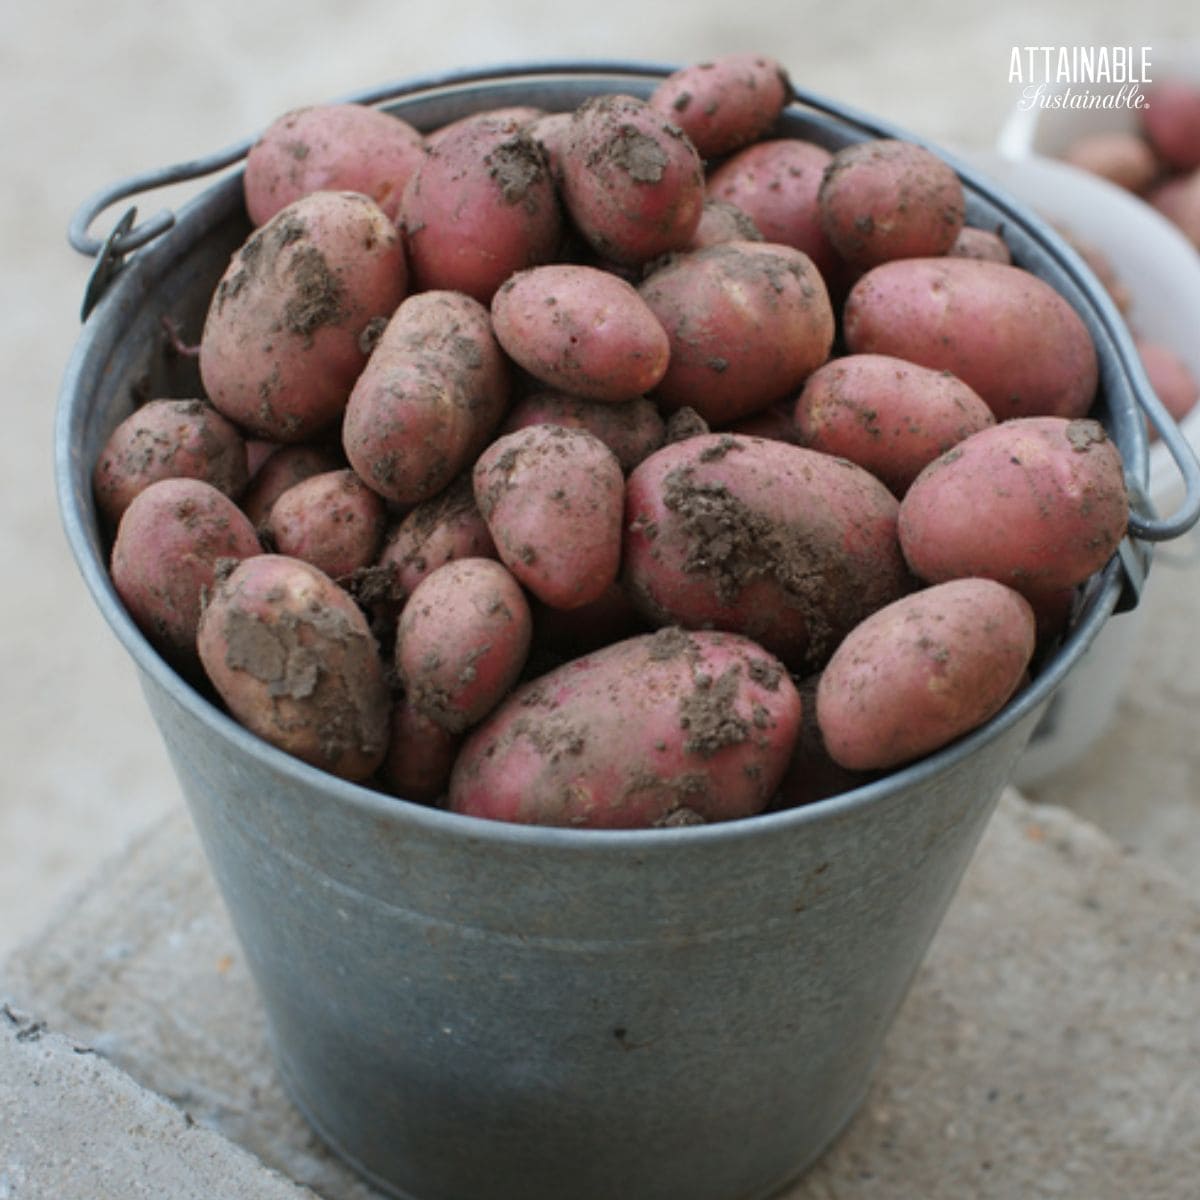 red potatoes in a galvanized bucket.